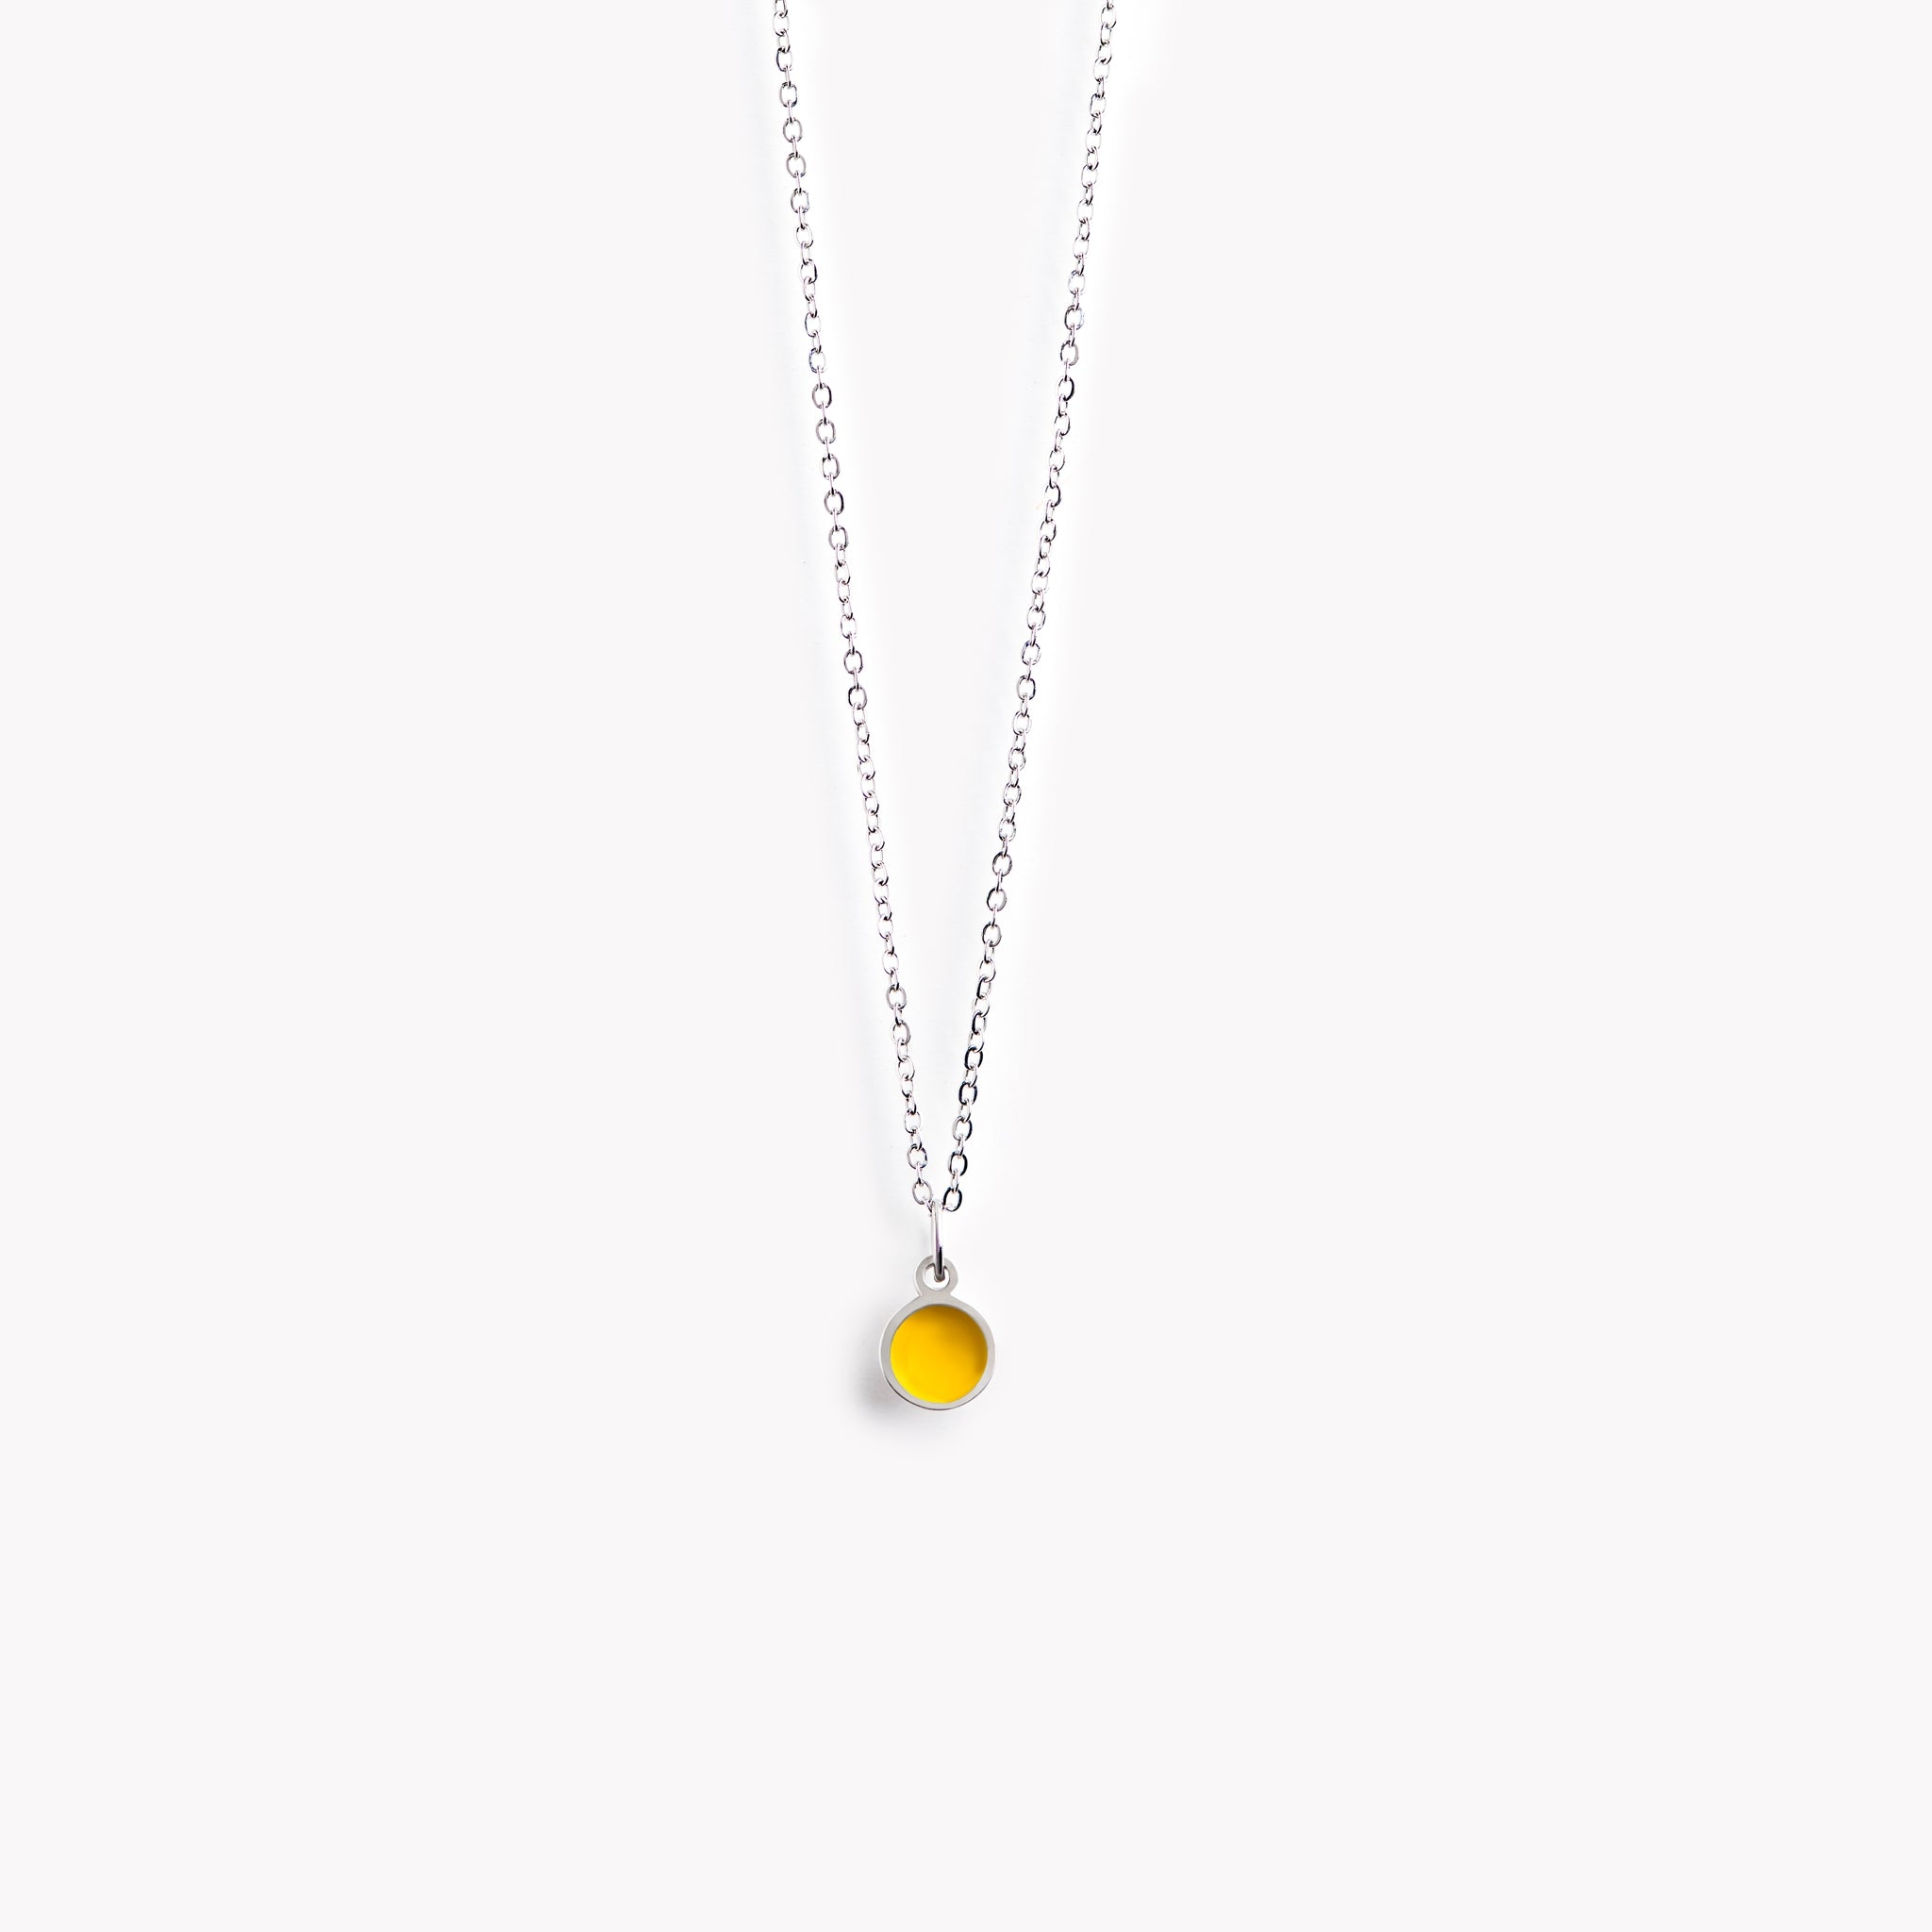 A simple, delicate, circular necklace with a bright yellow centre and a polished pewter surround.